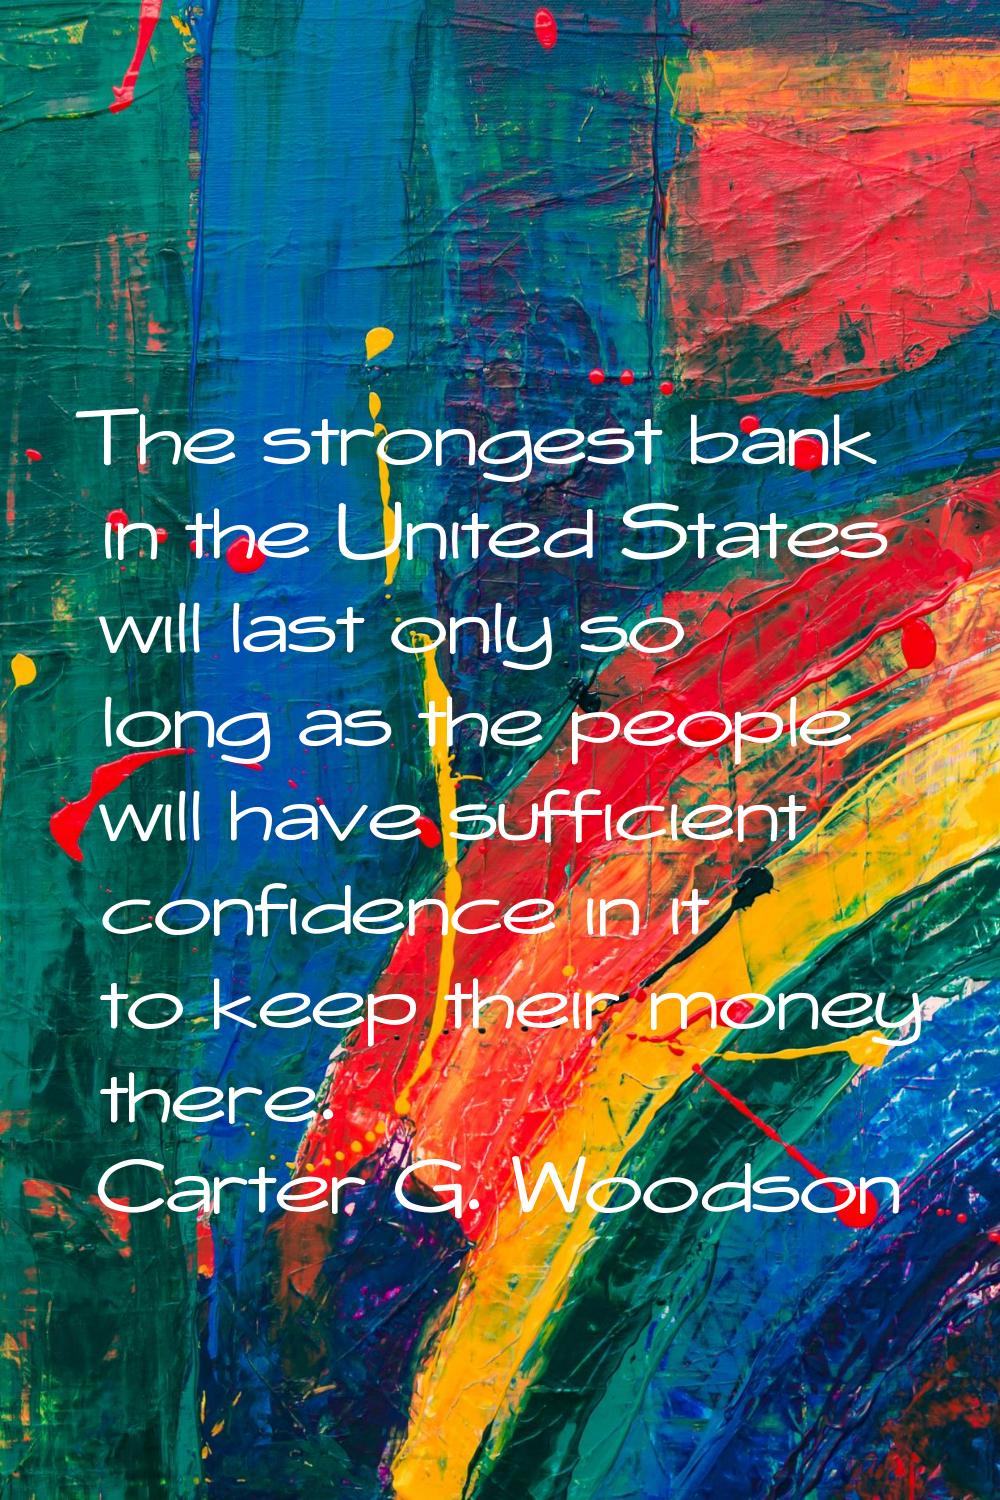 The strongest bank in the United States will last only so long as the people will have sufficient c